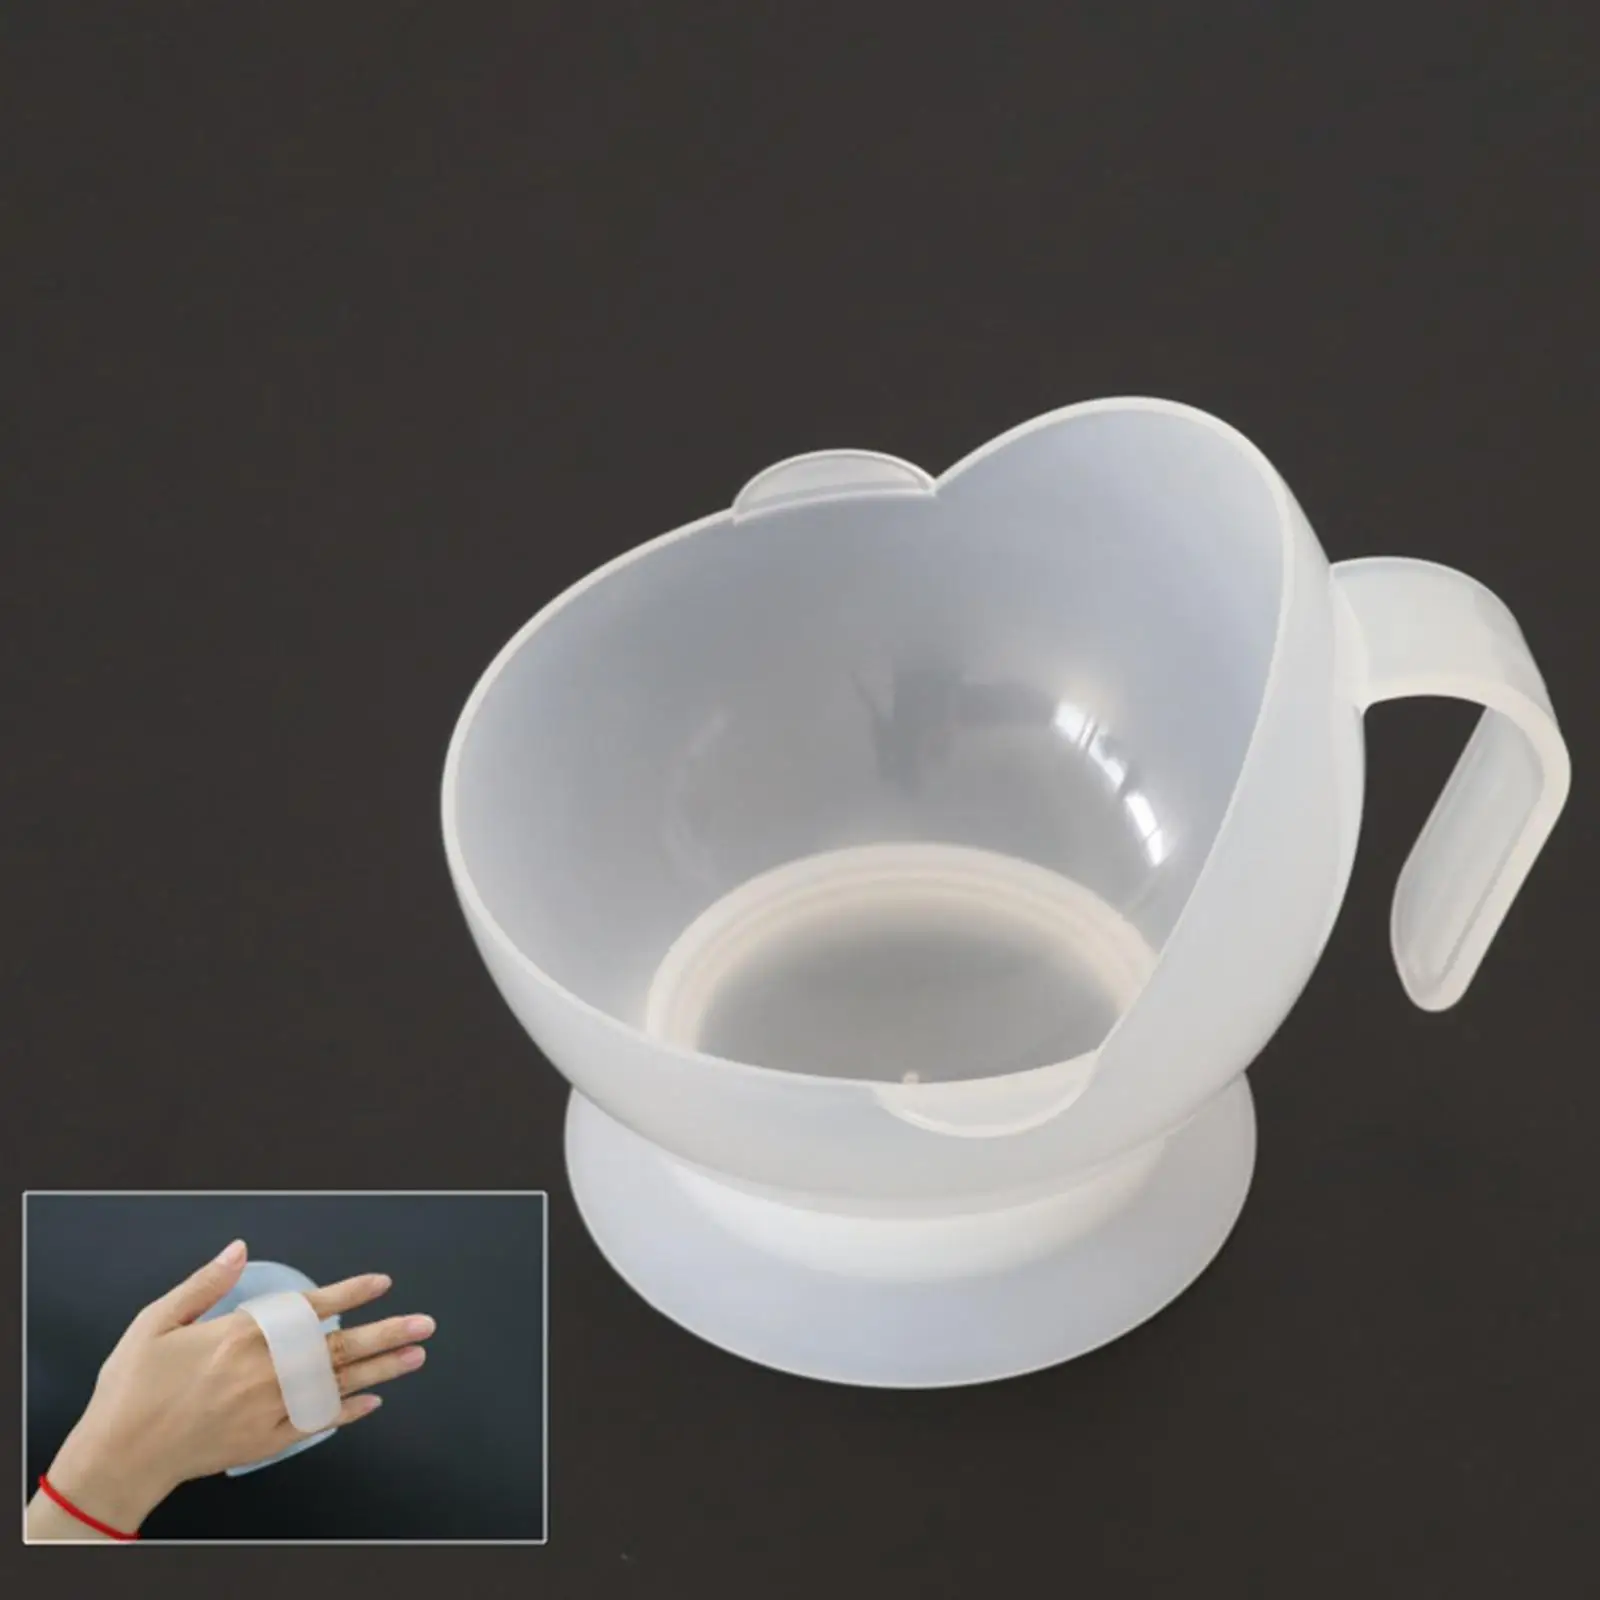 Spill Proof Scoop Bowl Proof Auxiliary Tableware Spill Proof Adaptive Equipment Adaptive Bowl Elderly Handicapped